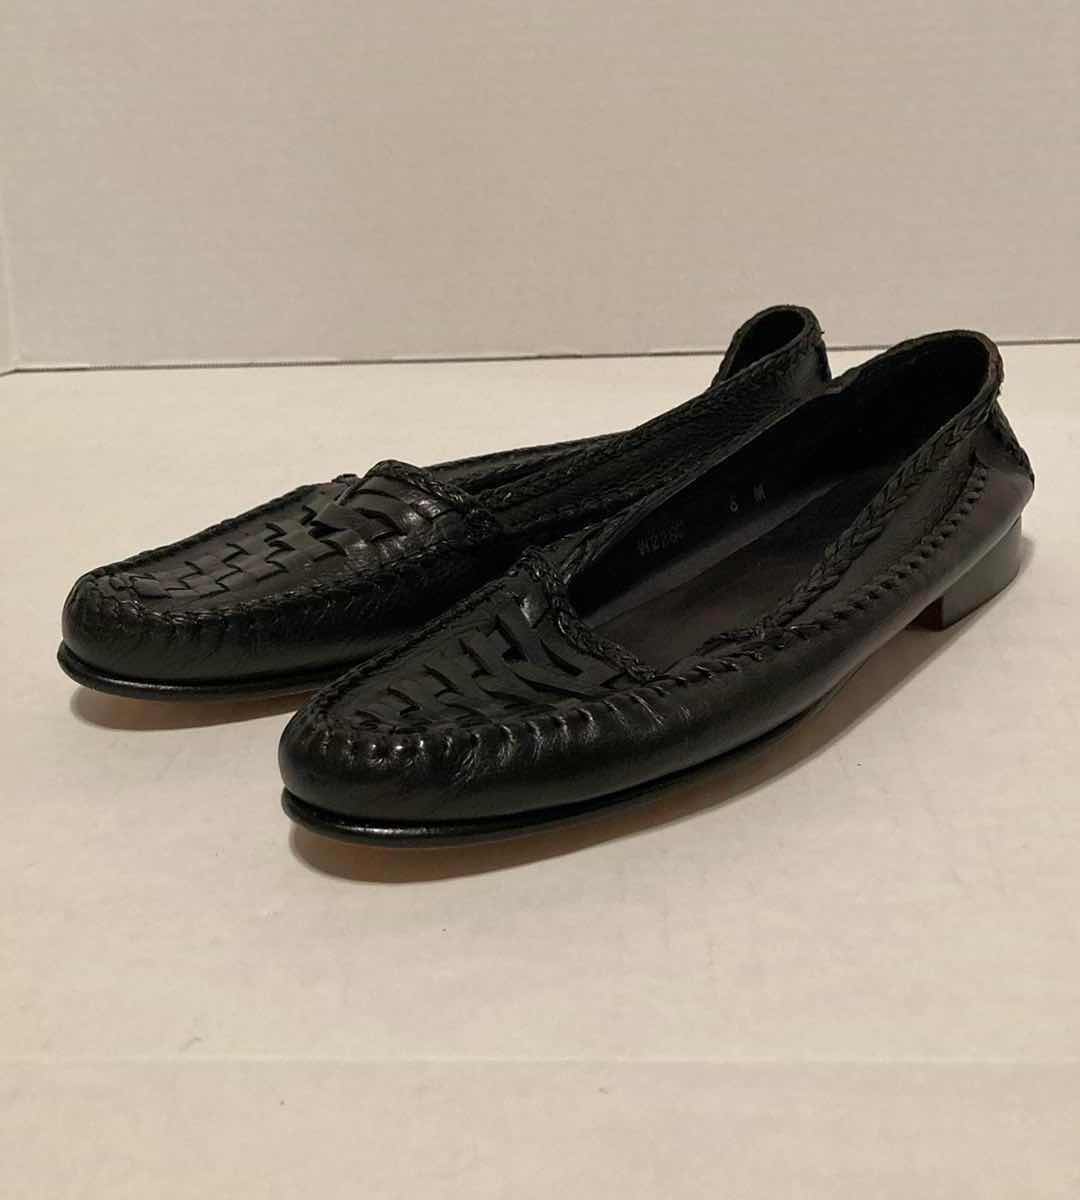 Photo 2 of CAPARROS BLACK OPEN TOE HEELS & COLE HAAN BLACK WOVEN LEATHER LOAFERS WOMEN’S SIZE 8-8.5